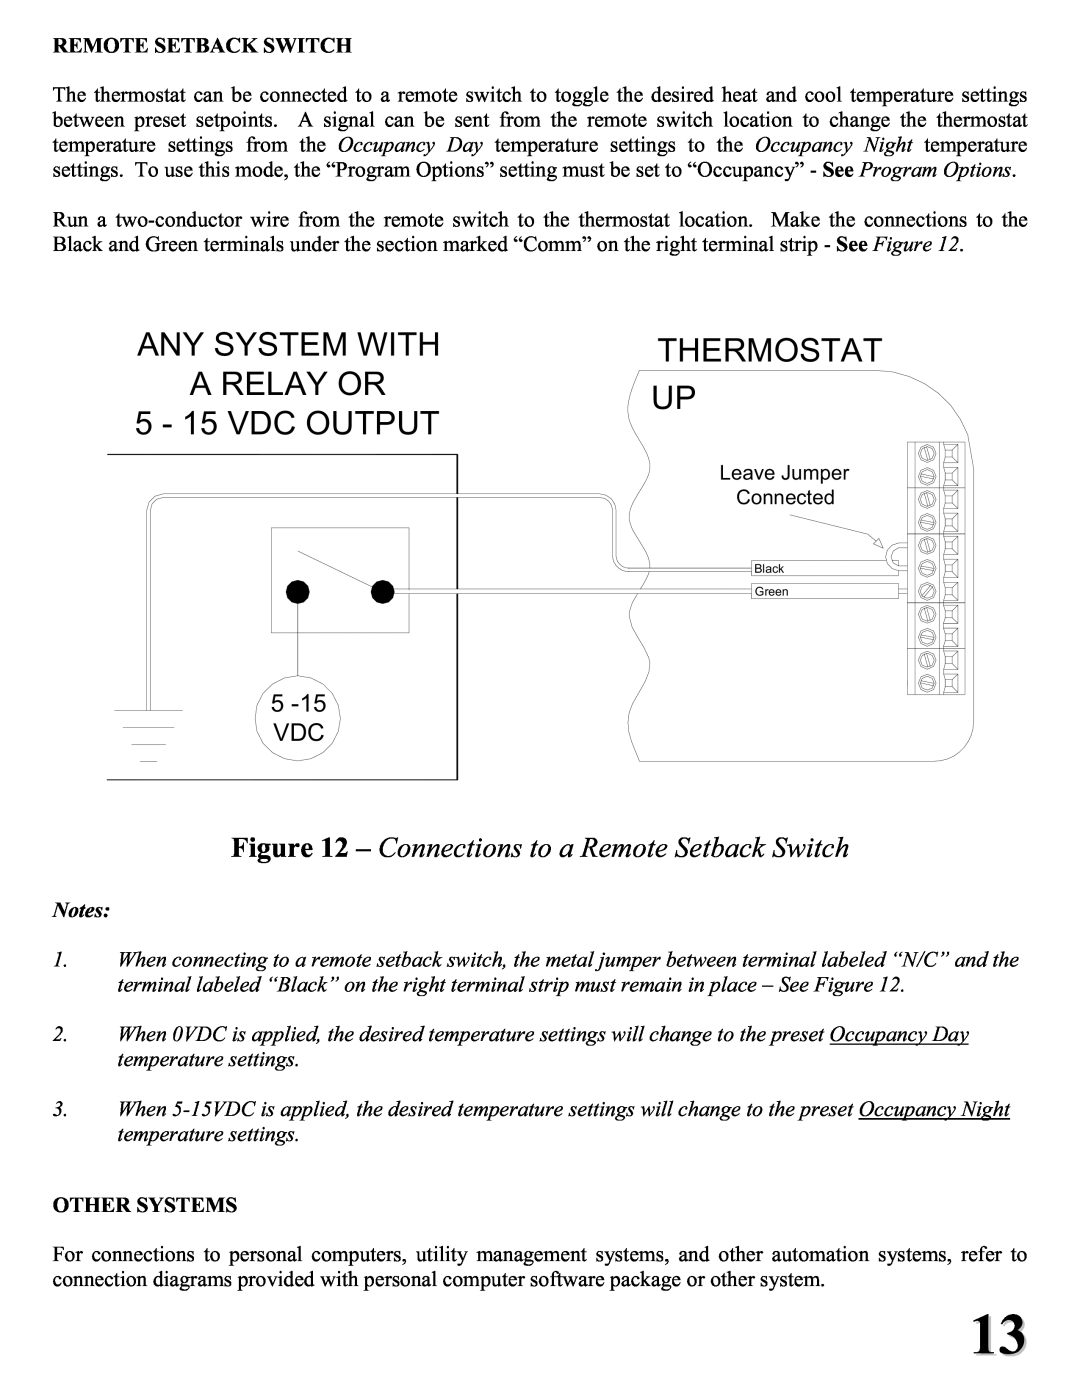 Home Automation RC-2000 installation instructions Thermostat, Any System With, A Relay Or, 5 - 15 VDC OUTPUT 